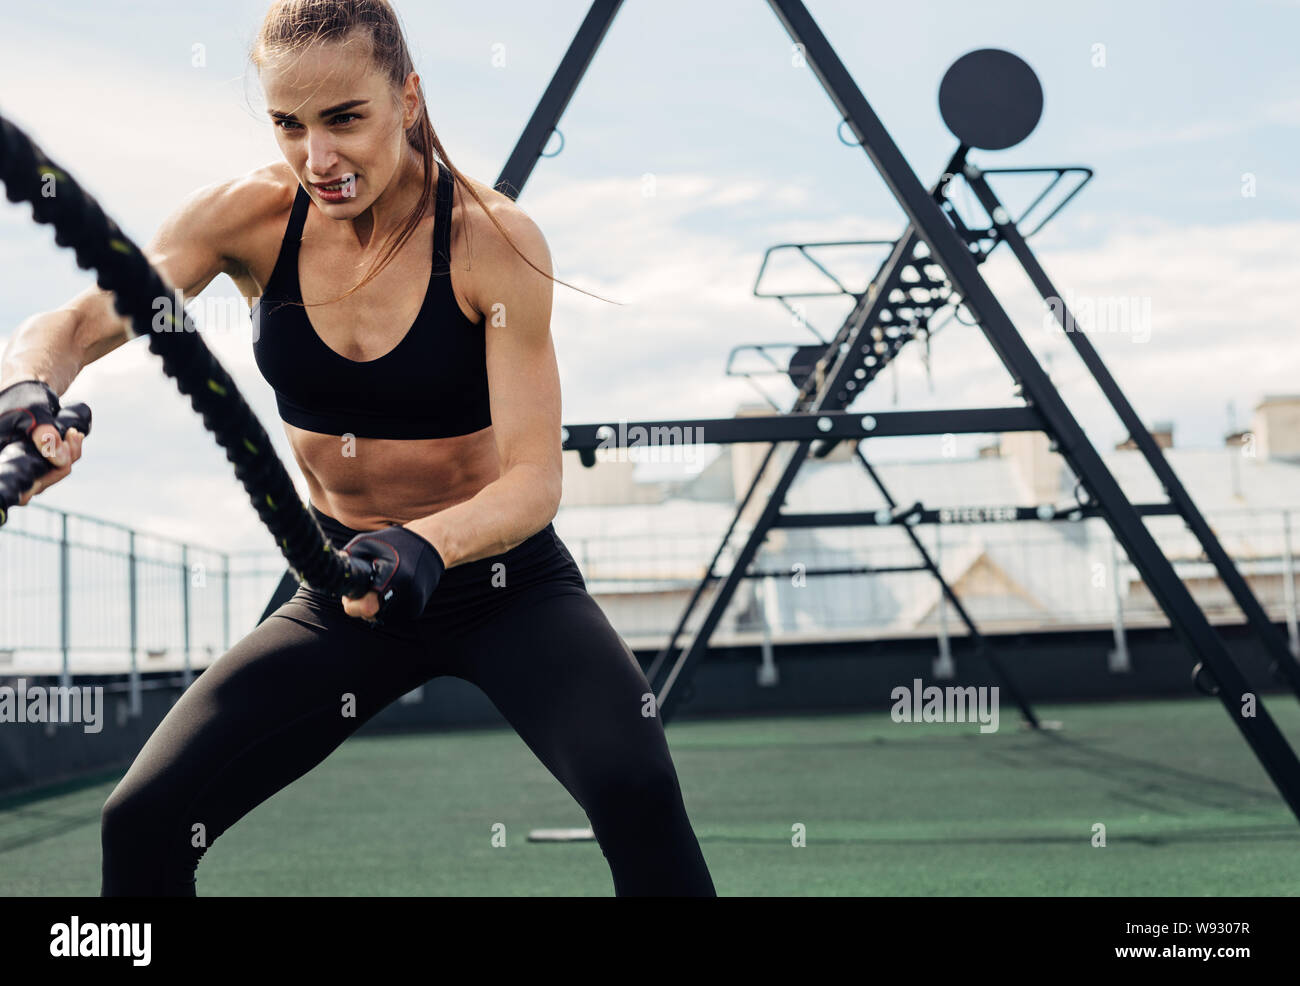 Woman using battle ropes during strength training on rooftop. Young female working out outdoors. Stock Photo